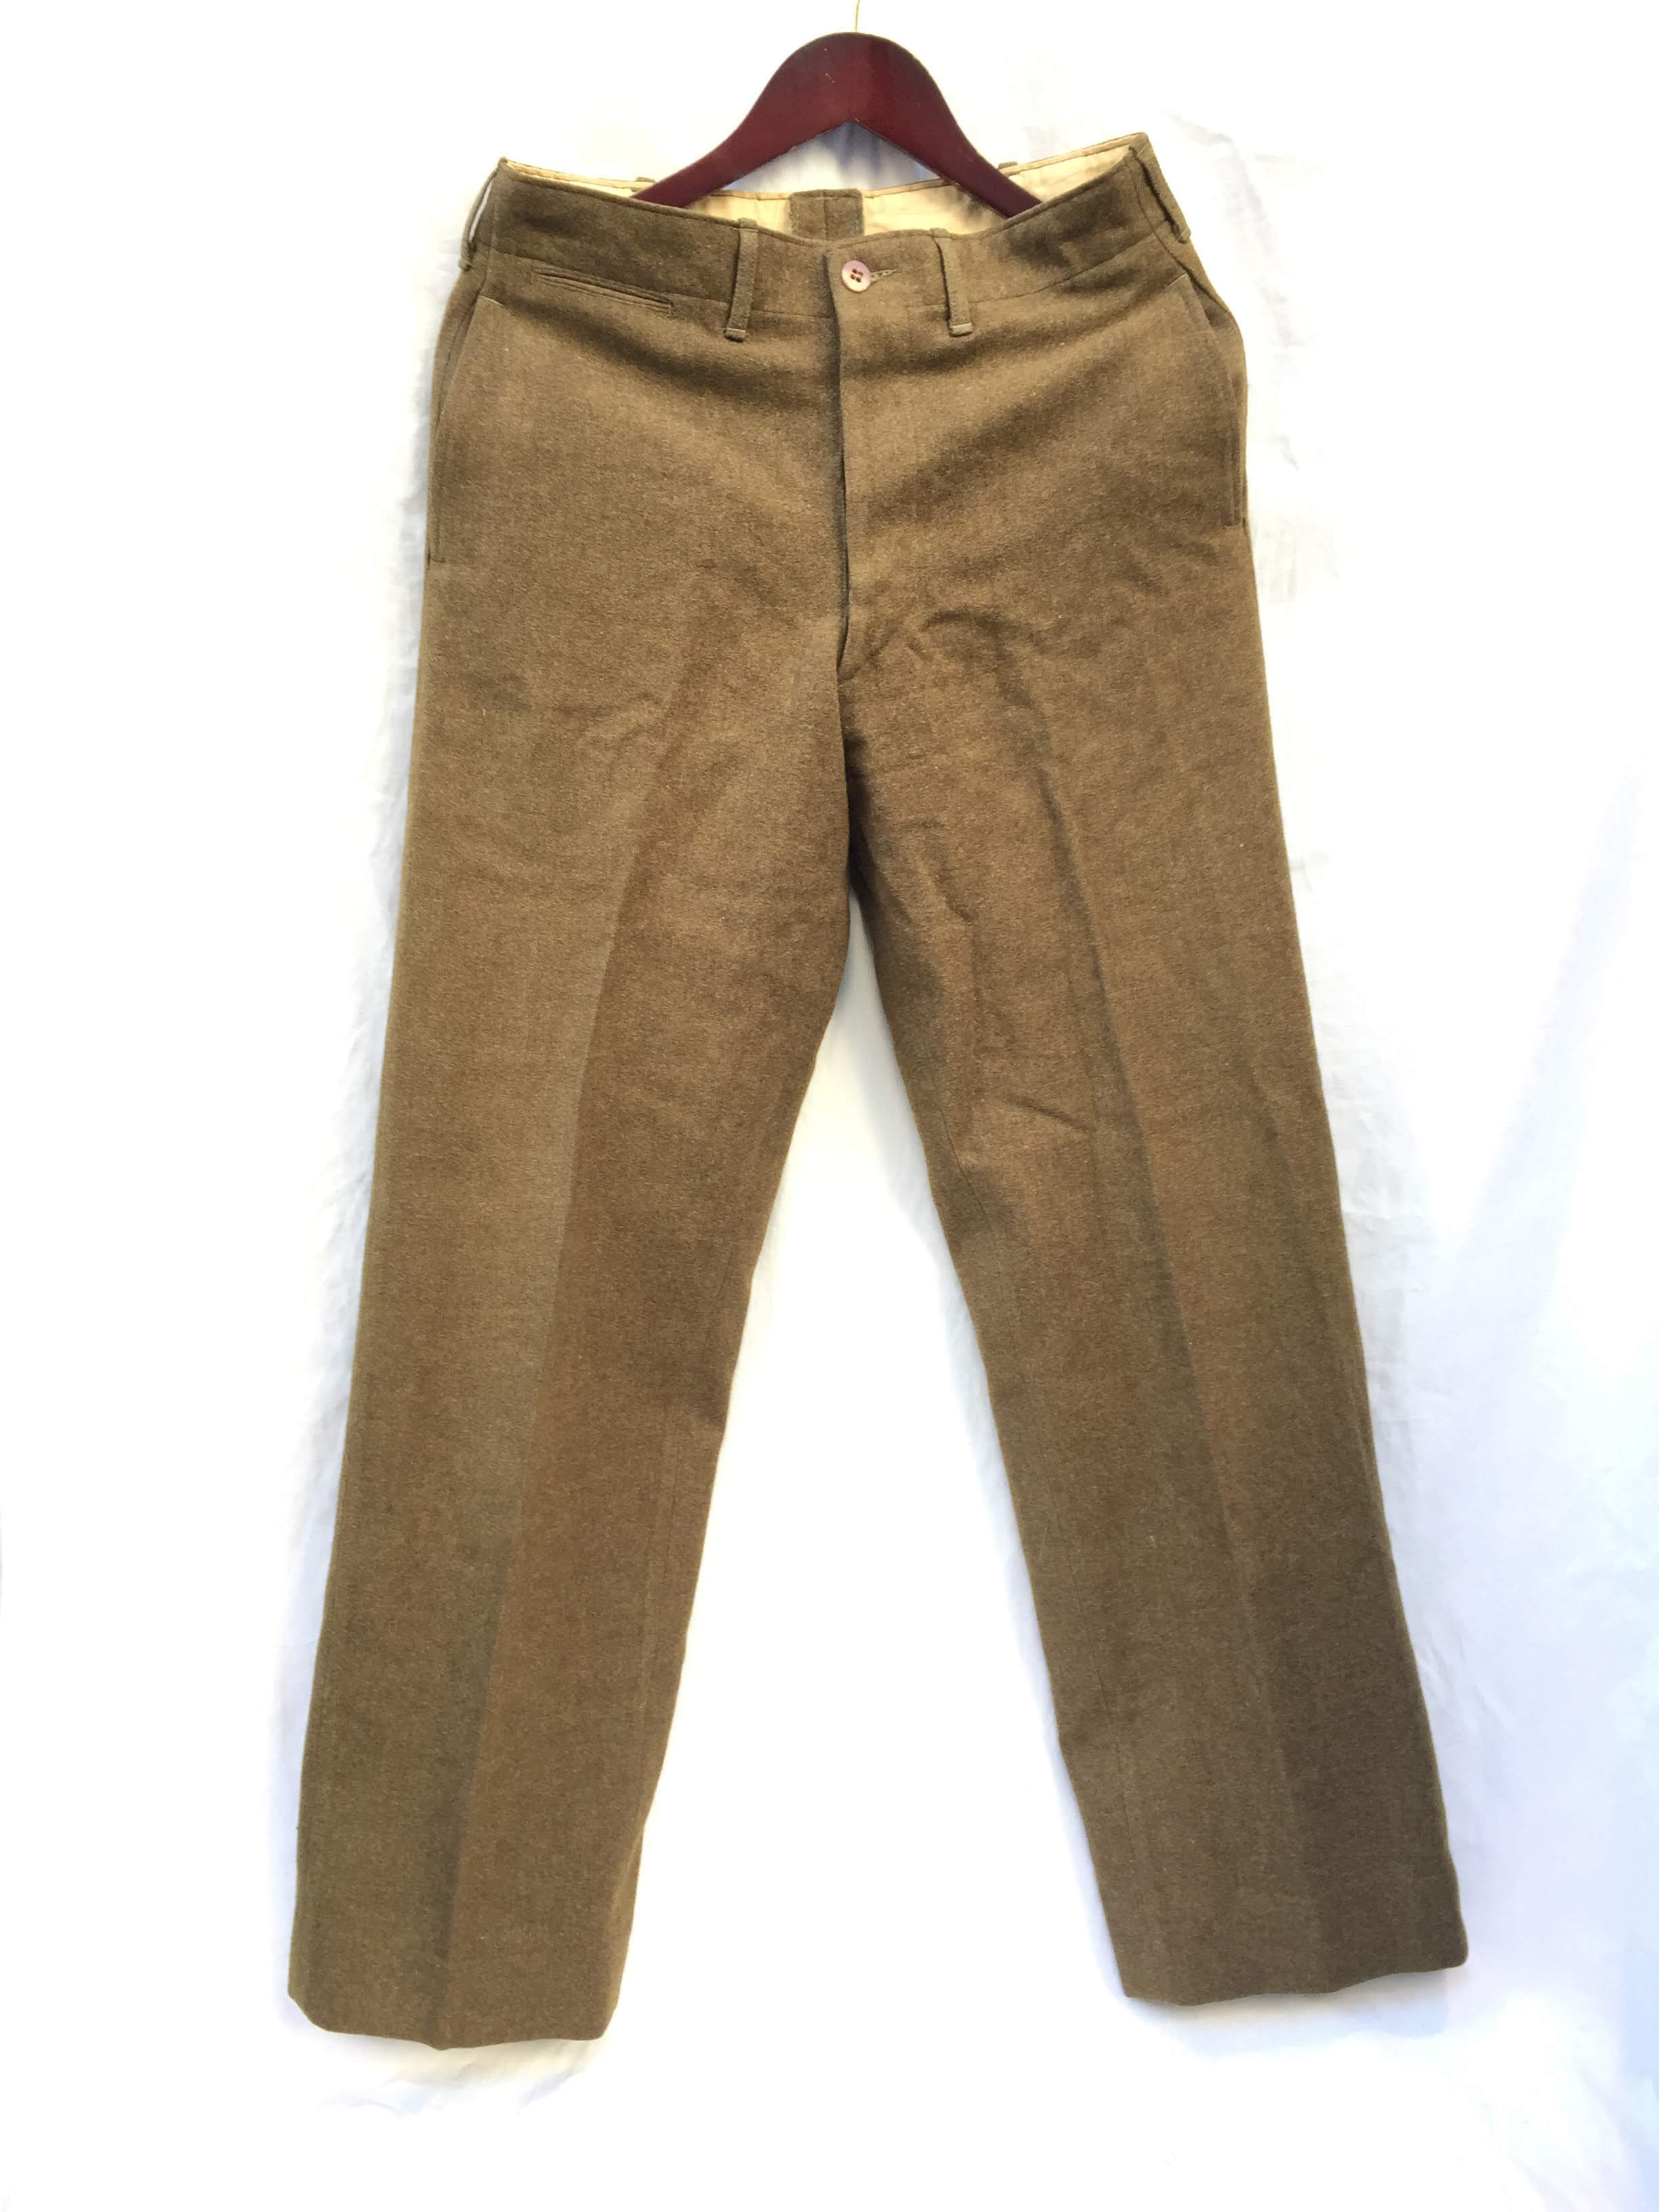 40's Vintage US Army Wool Trousers Good Condition